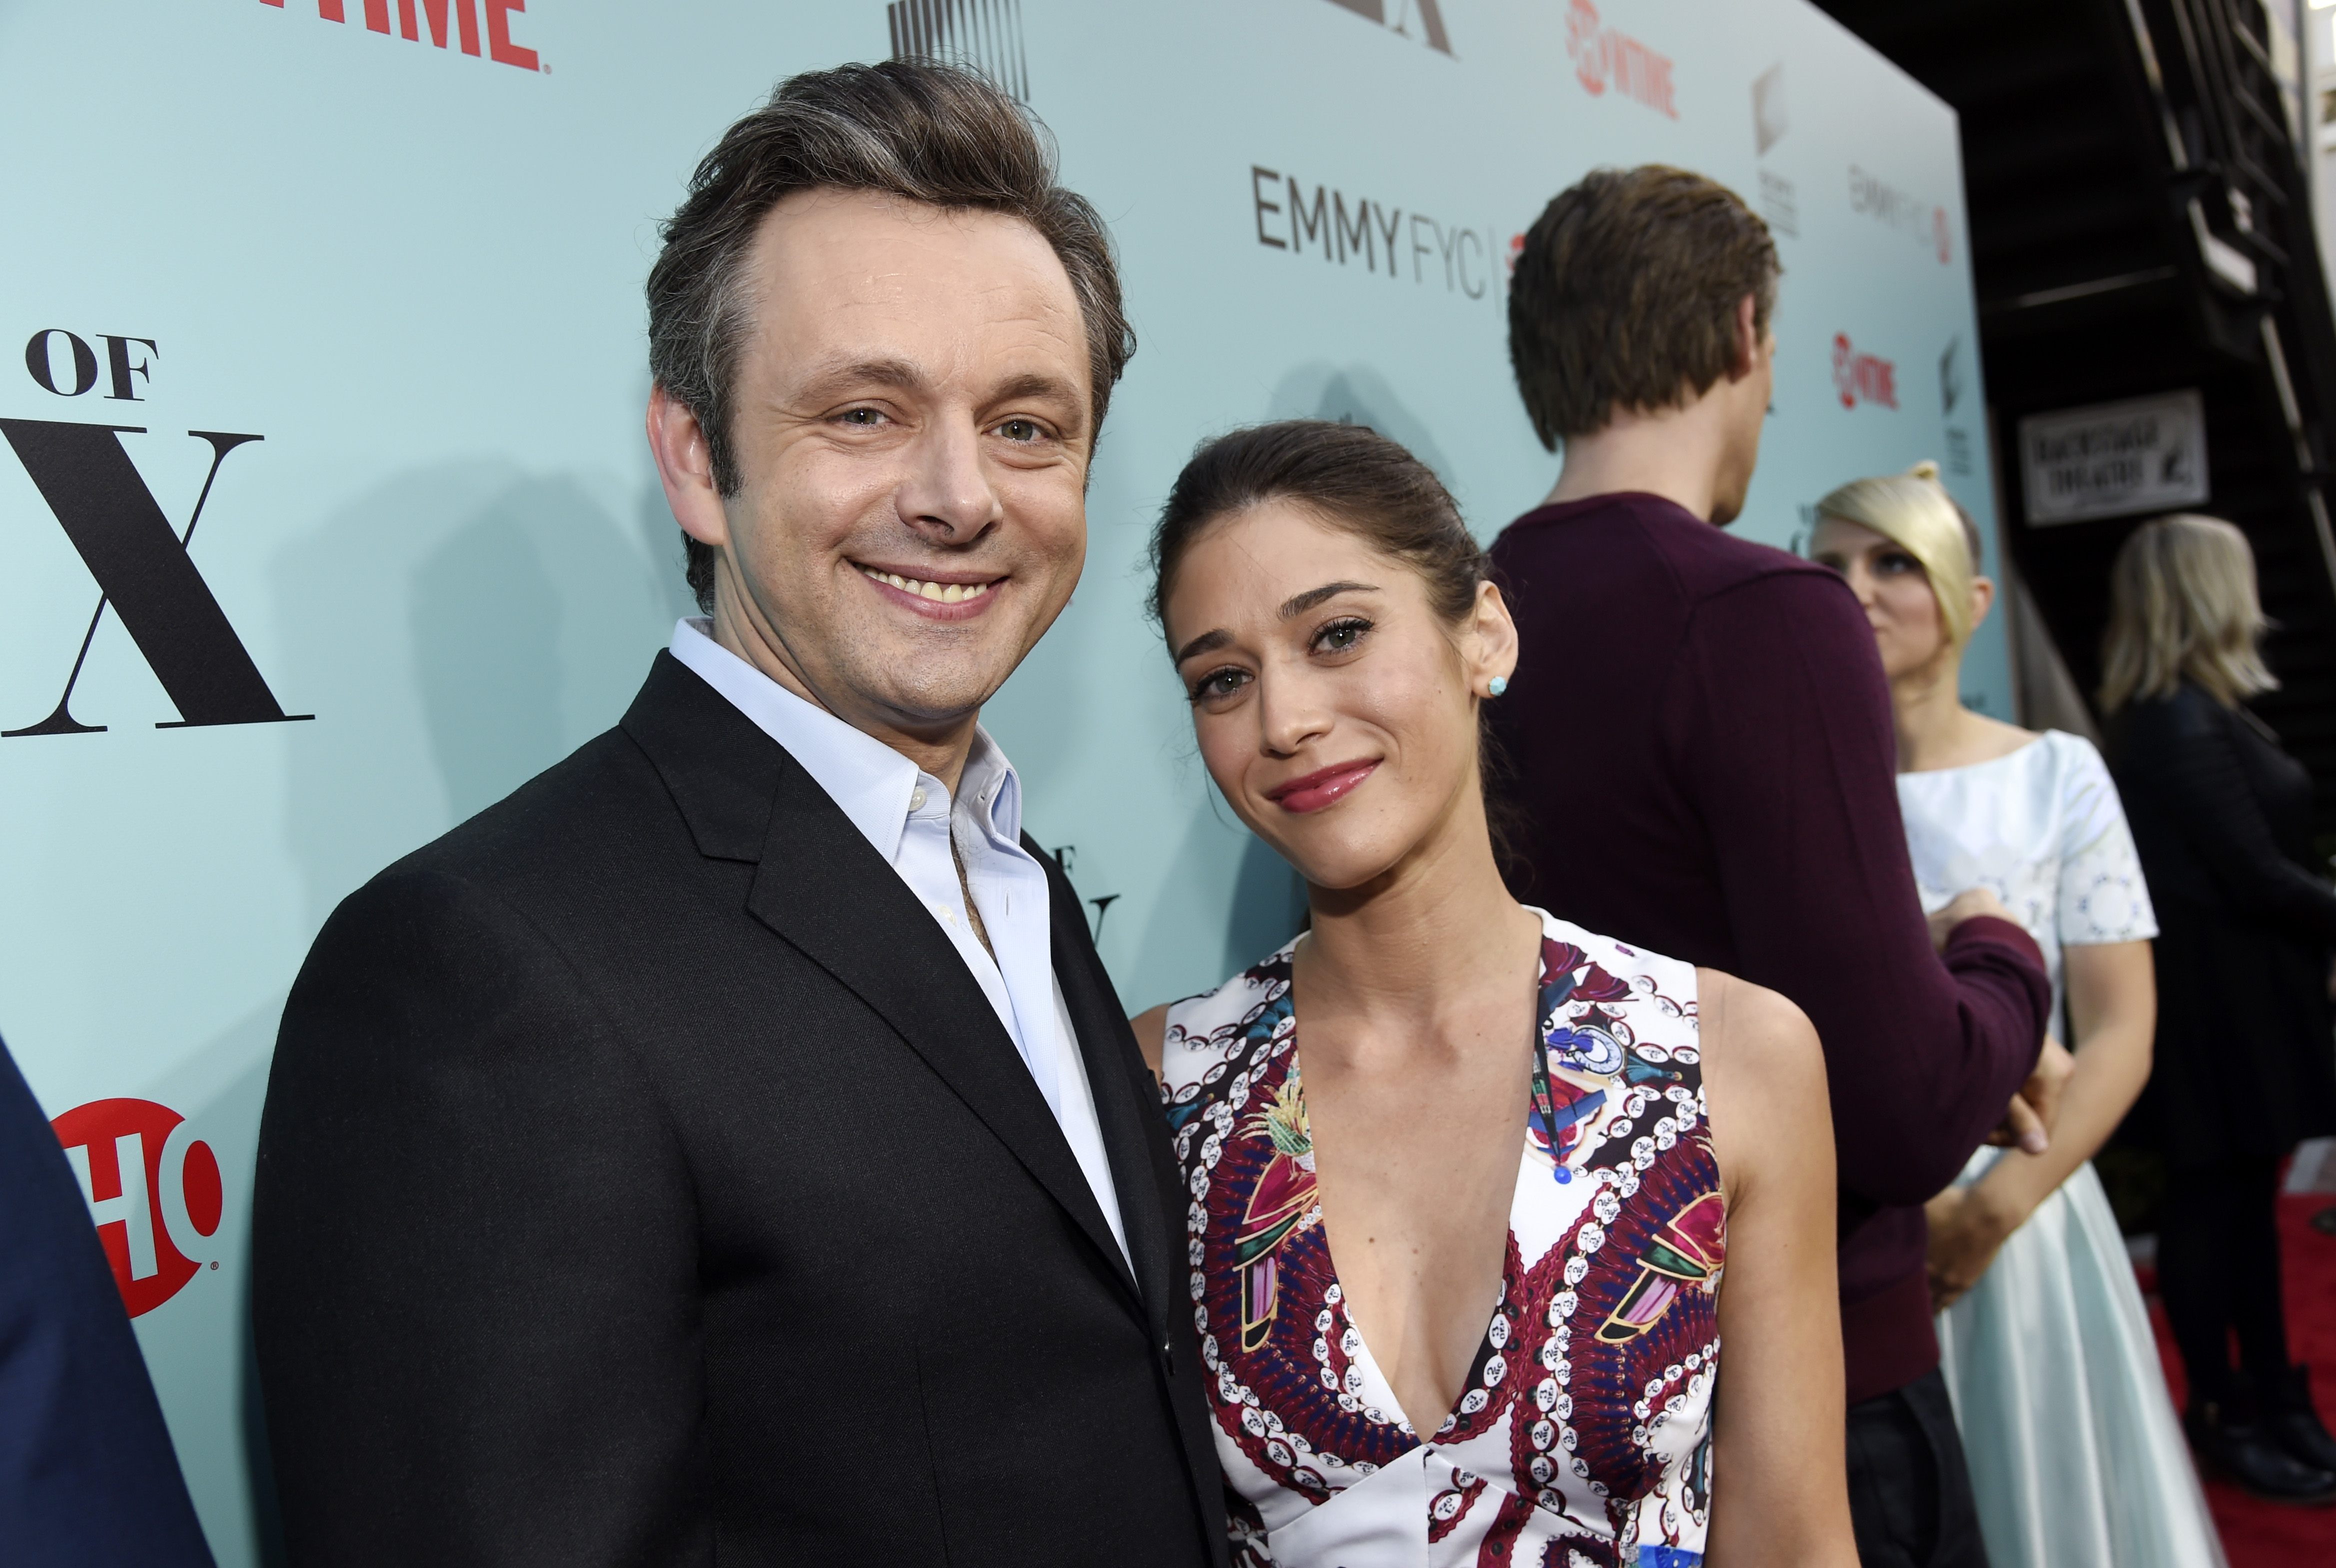 Michael Sheen, left, and Lizzy Caplan, cast members in the Showtime series "Masters of Sex," pose together at a screening and panel discussion for the show at Sony Pictures Studios on Tuesday, May 5, 2015, in Culver City, Calif. (Chris Pizzello–AP)